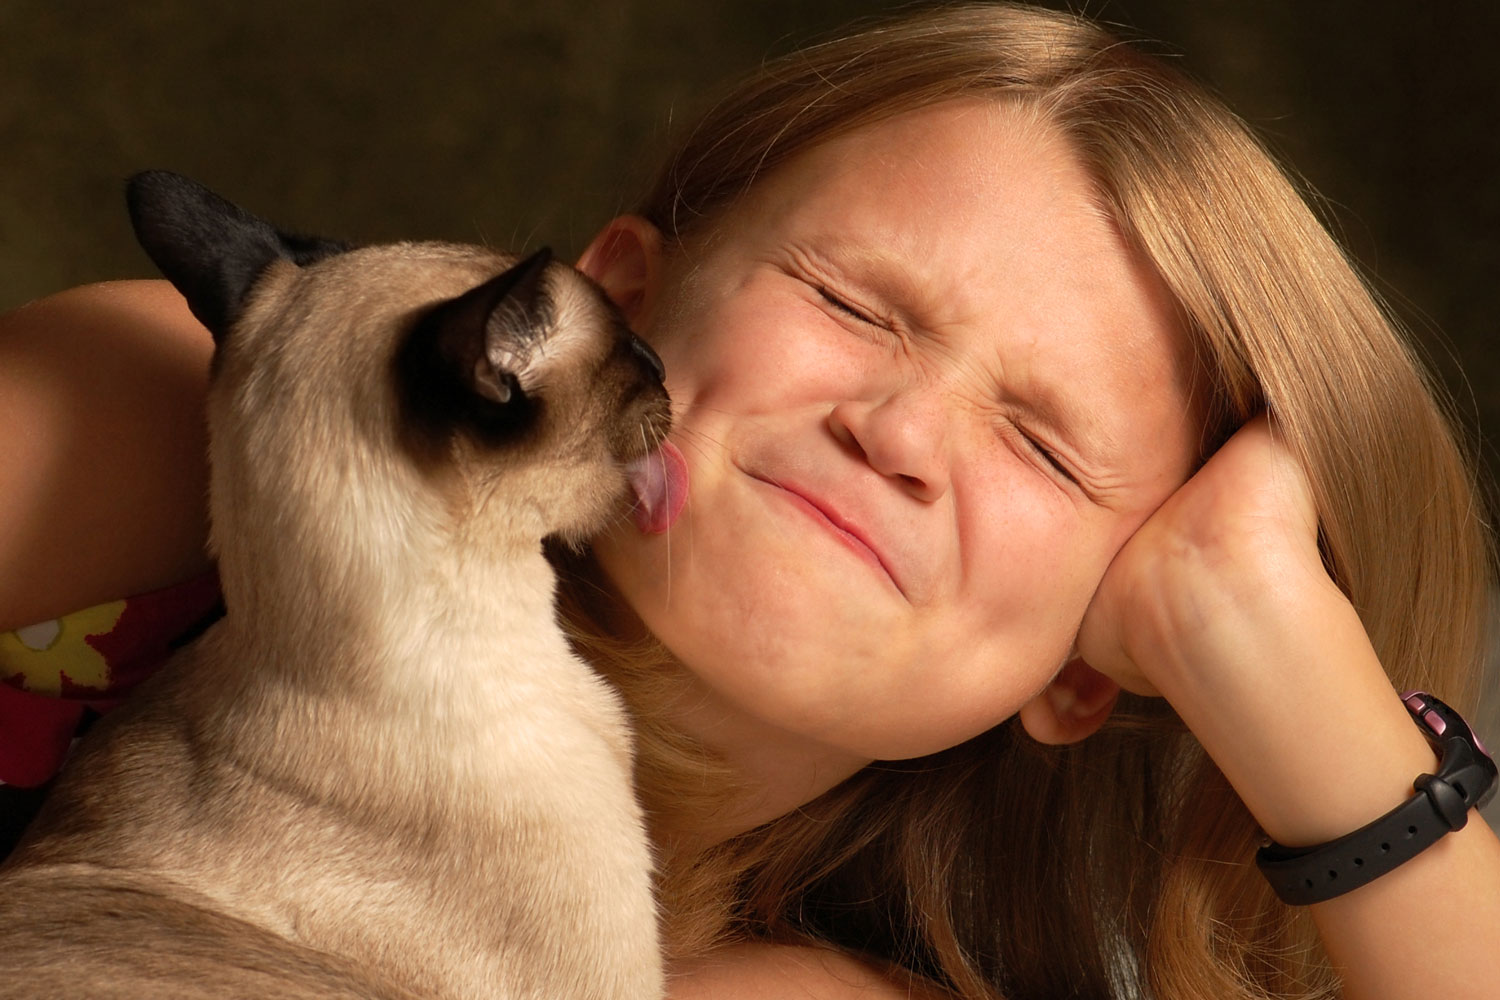 A cute Siamese cat licking her owners face, Why Does My Cat Lick My Face?